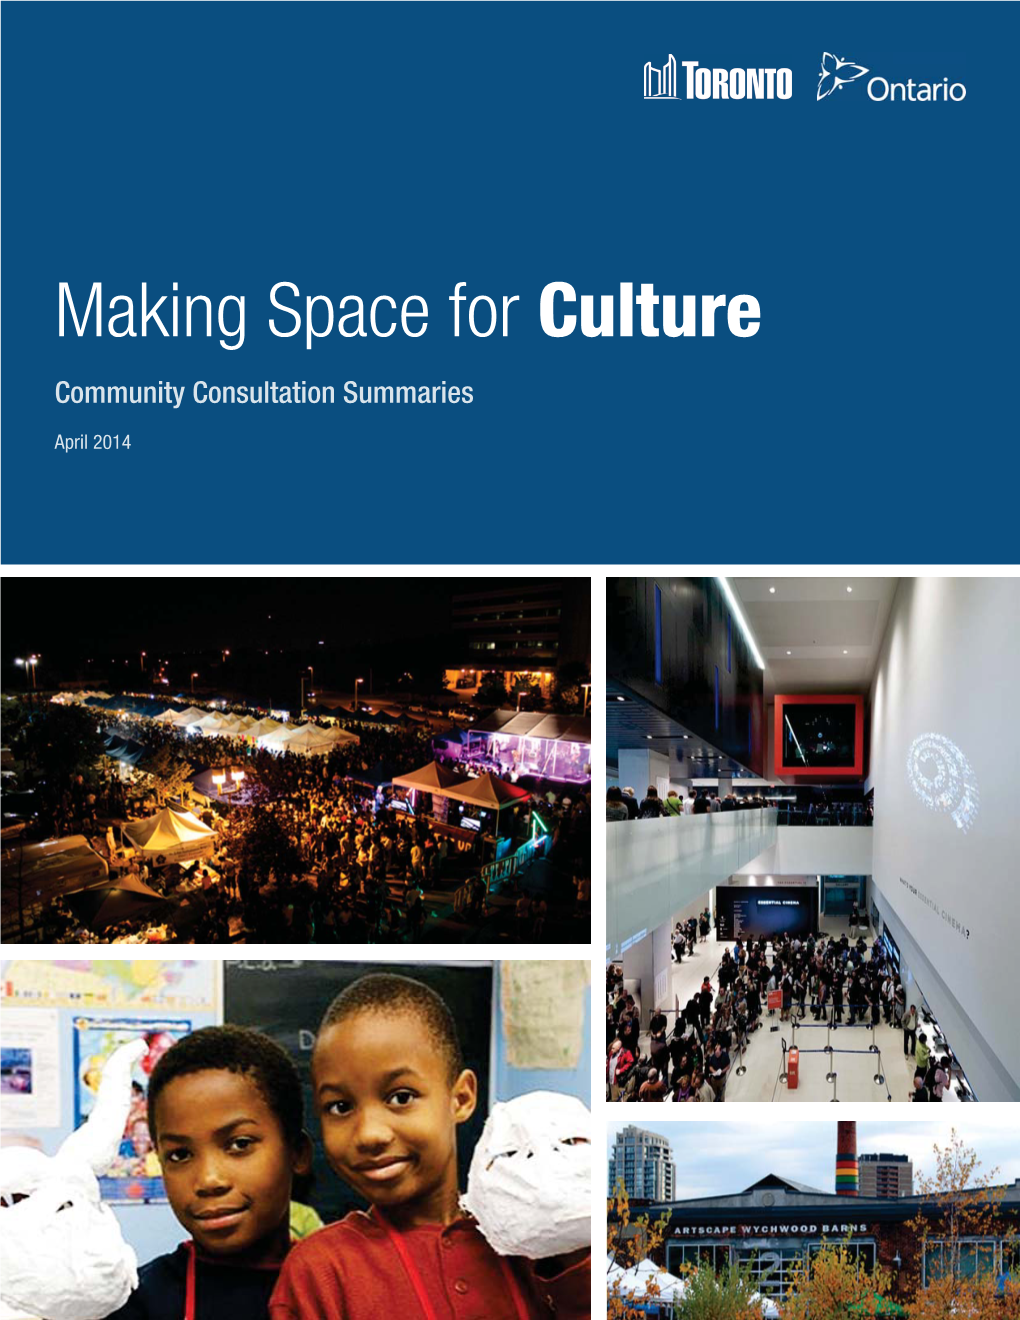 Making Space for Culture: Community Consultation Summaries